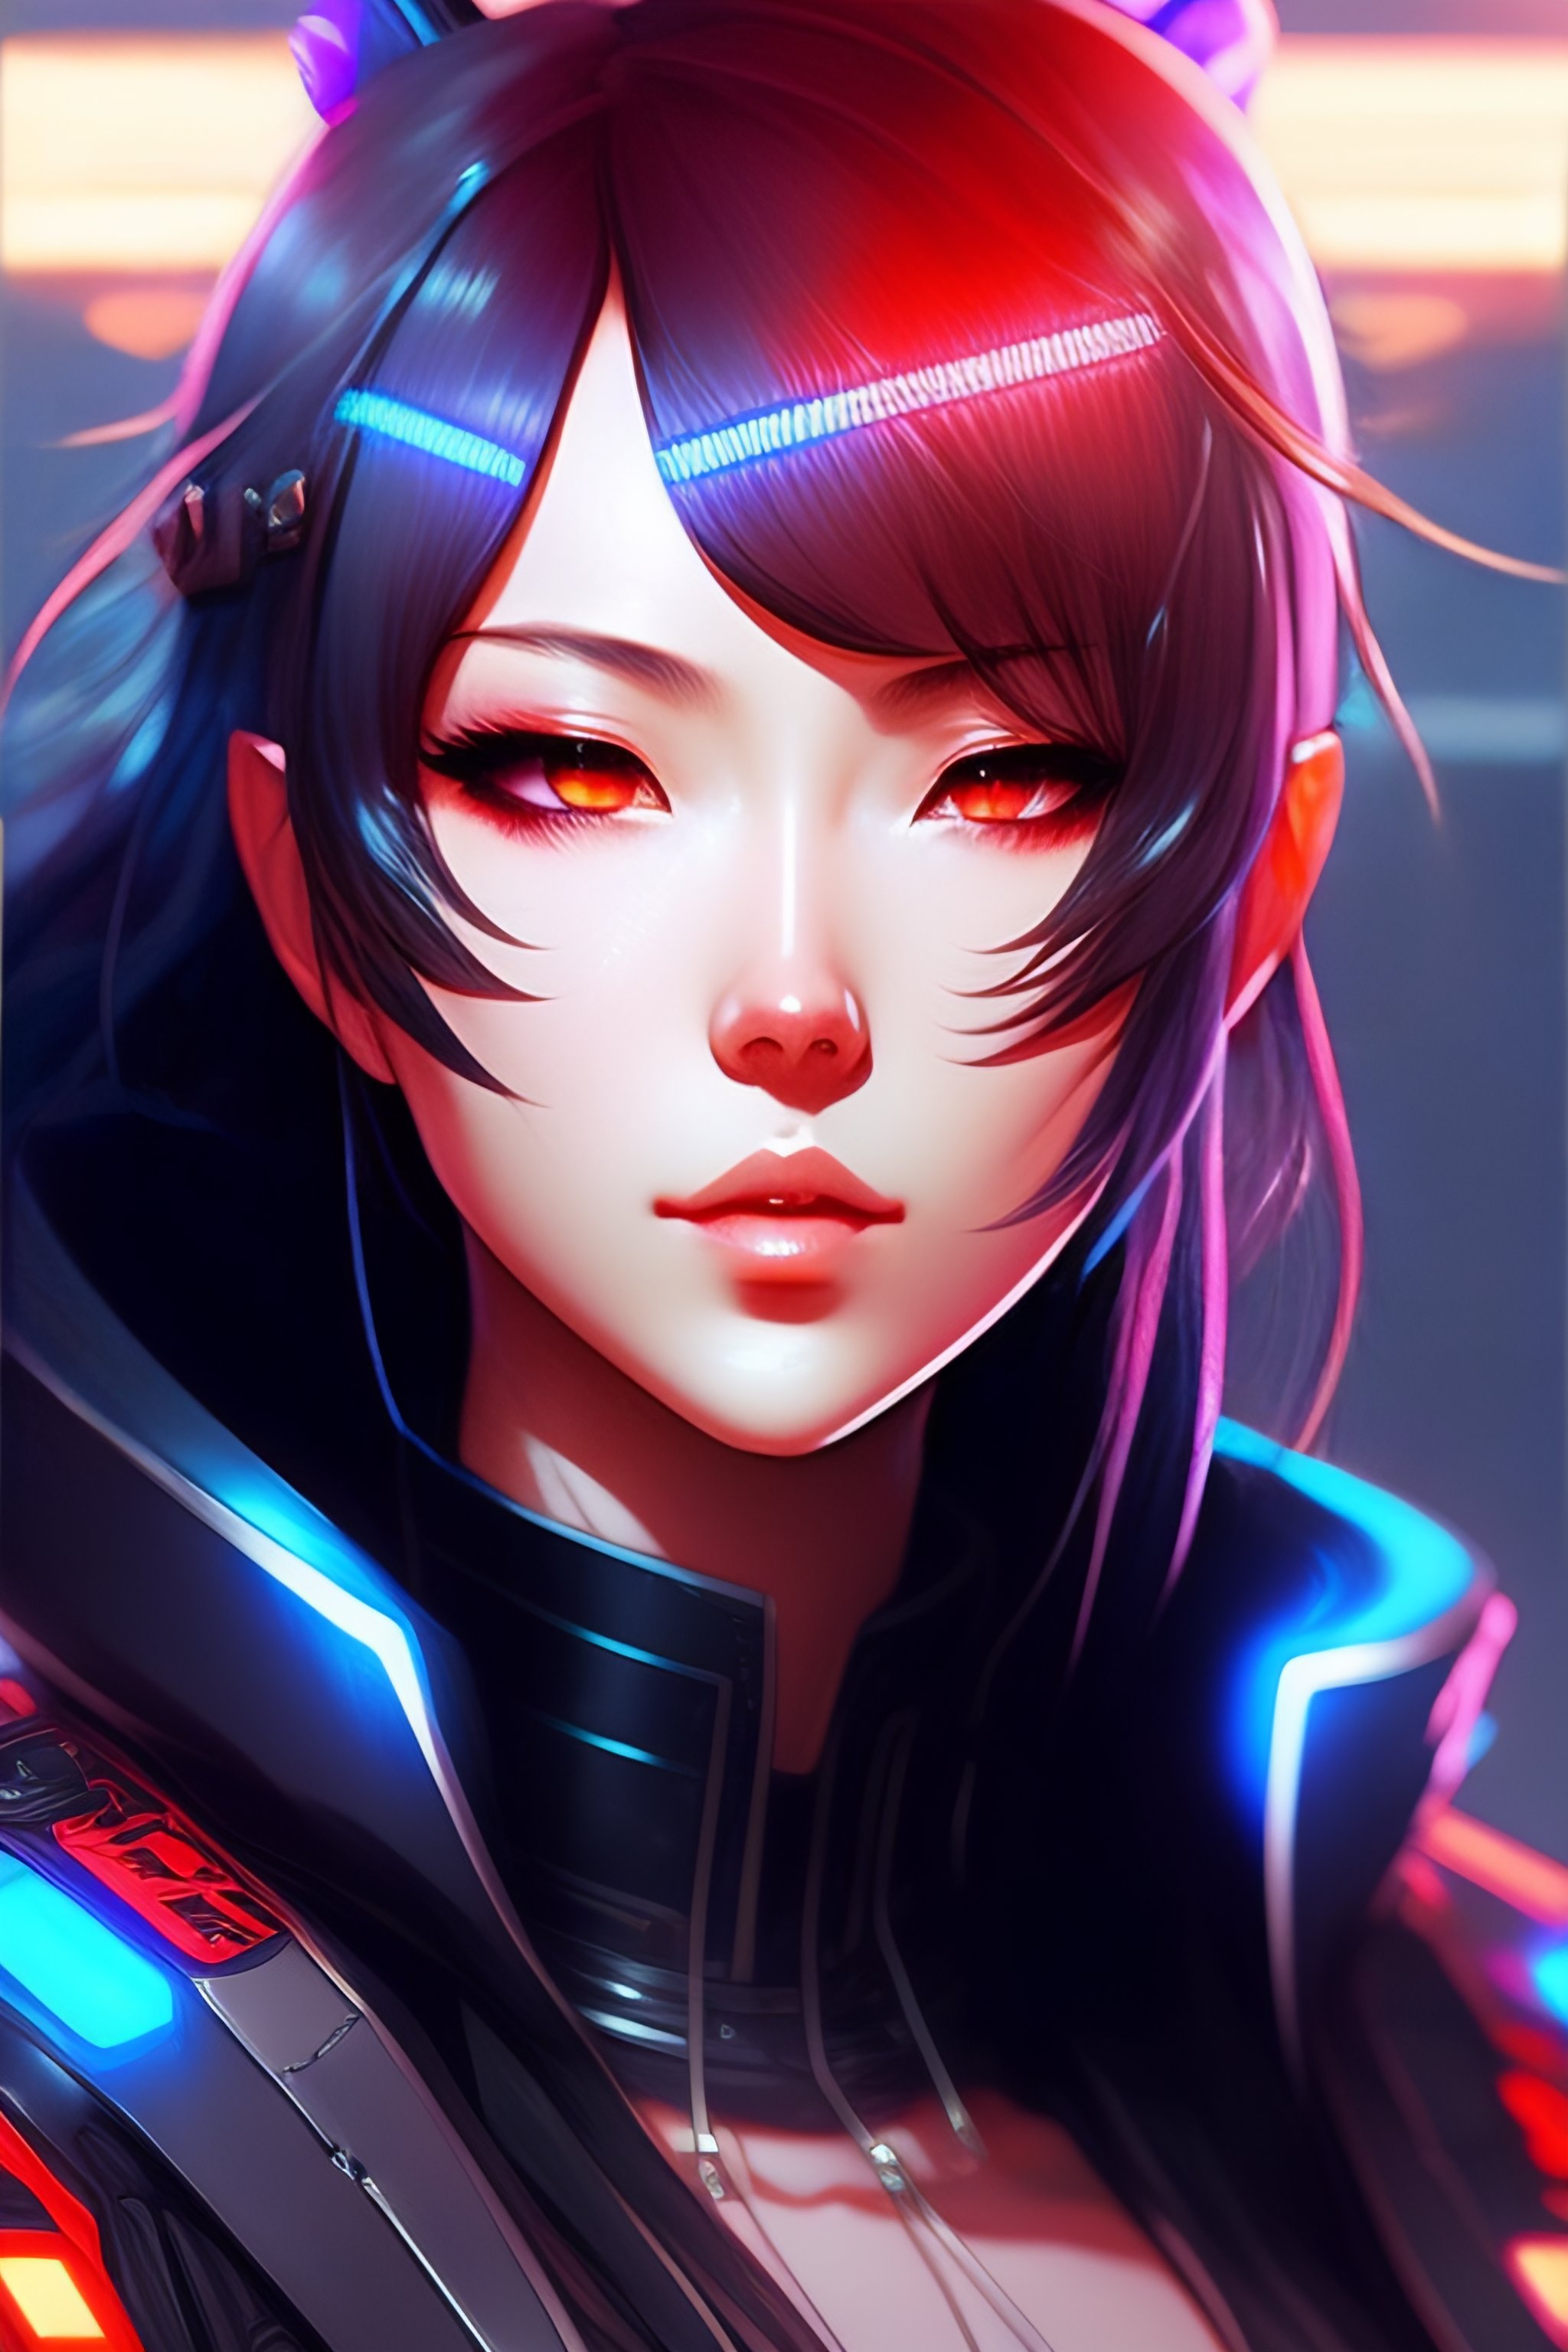 Lexica - Digital cyberpunk anime character concept art, gorgeous anime girl  symmetrical face, small female android cyborg - angel, glowing red left e